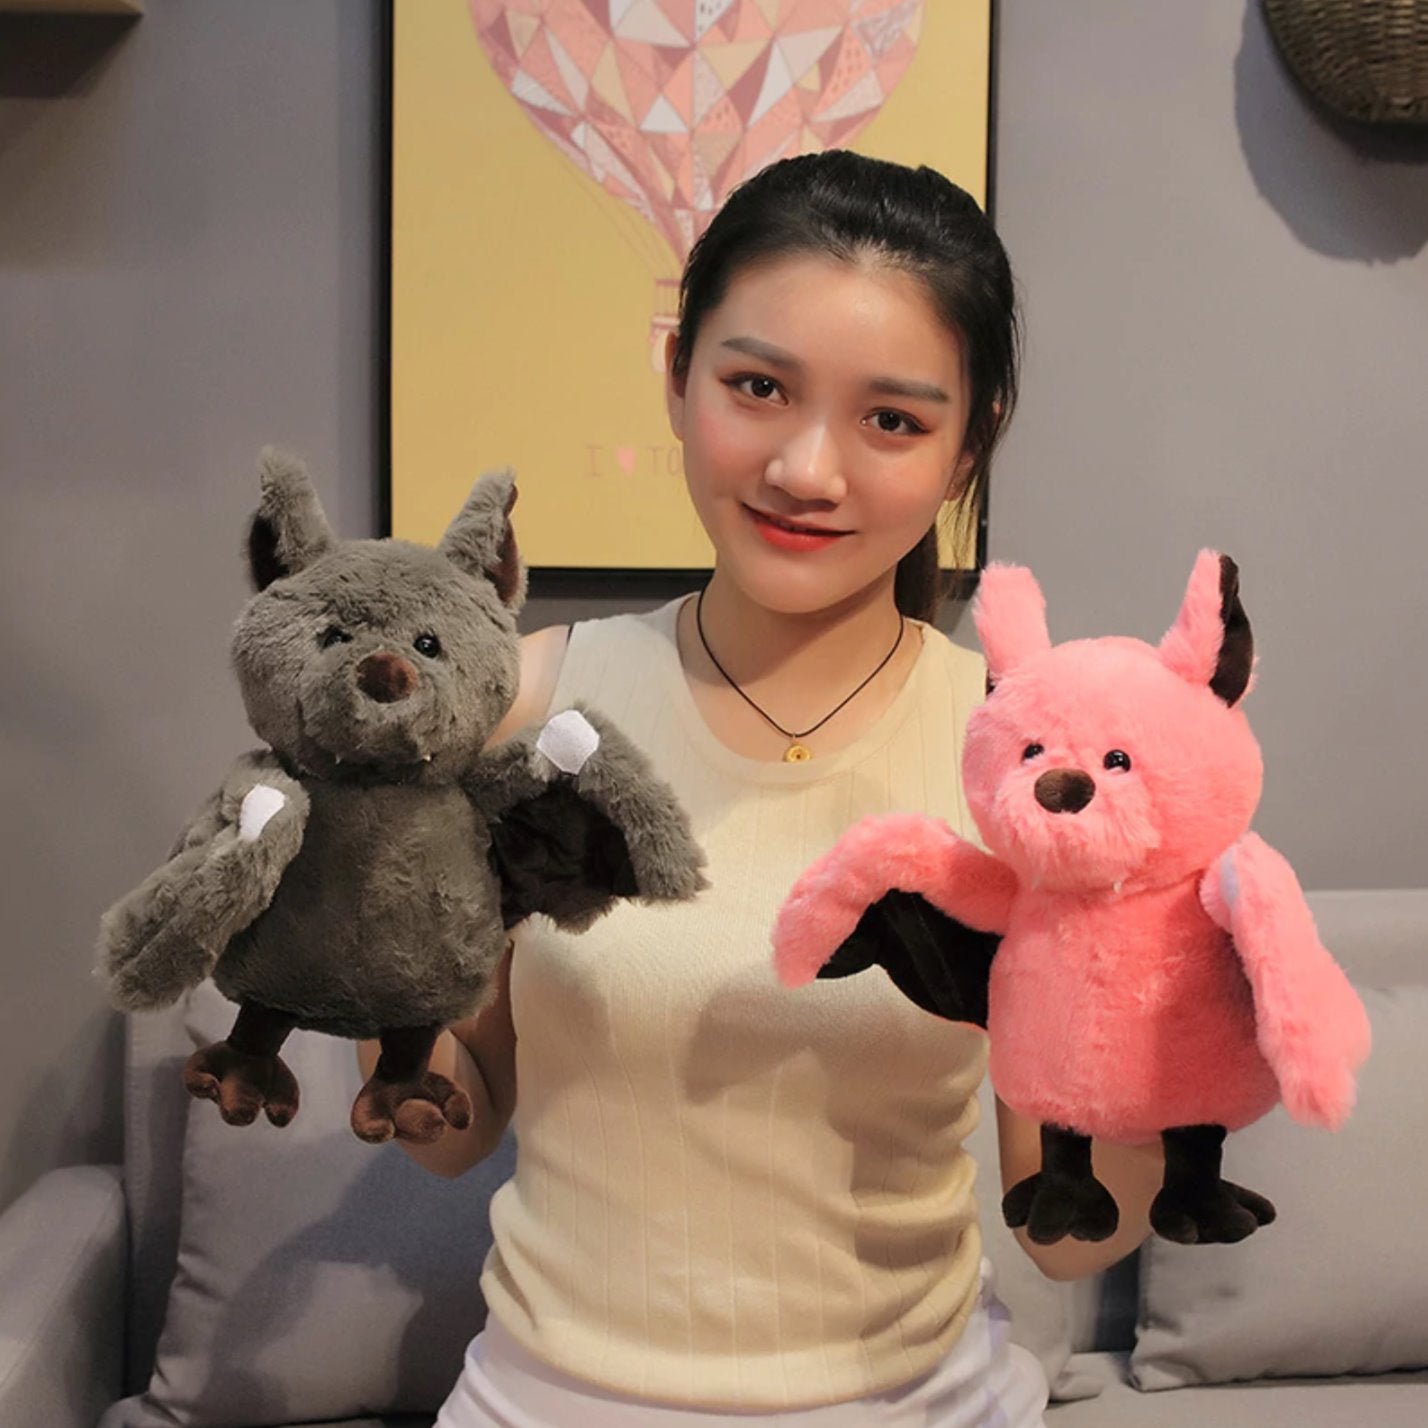 Barry the Bat Plushies: Adorable and Collectible Stuffed Animals for Bat Lovers